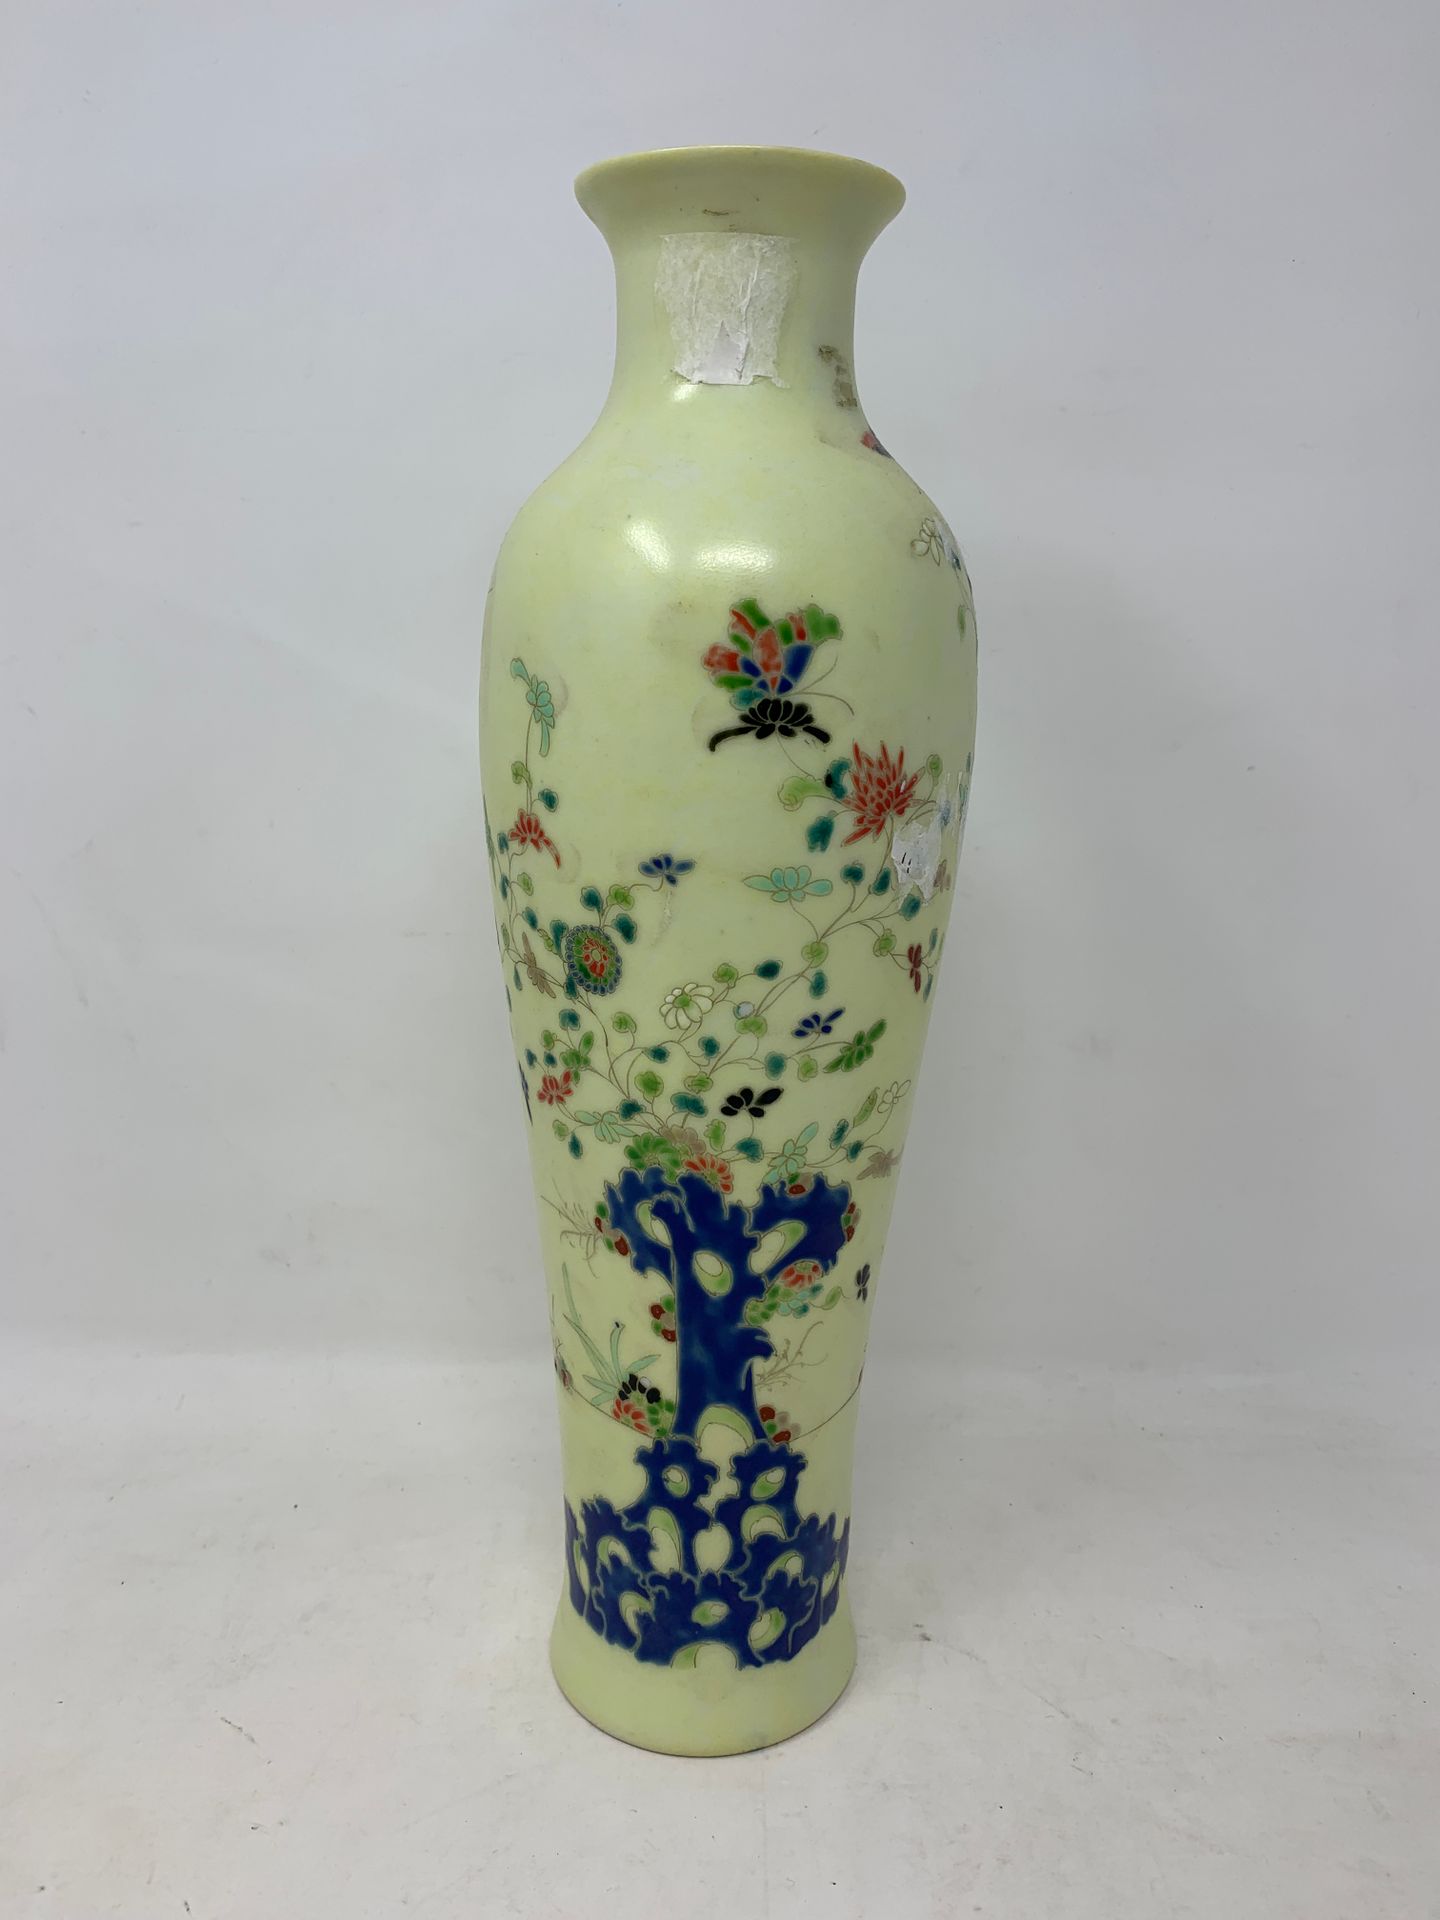 Null 
Vase with a tree and flowers decoration

Japan

H. 31.5 cm